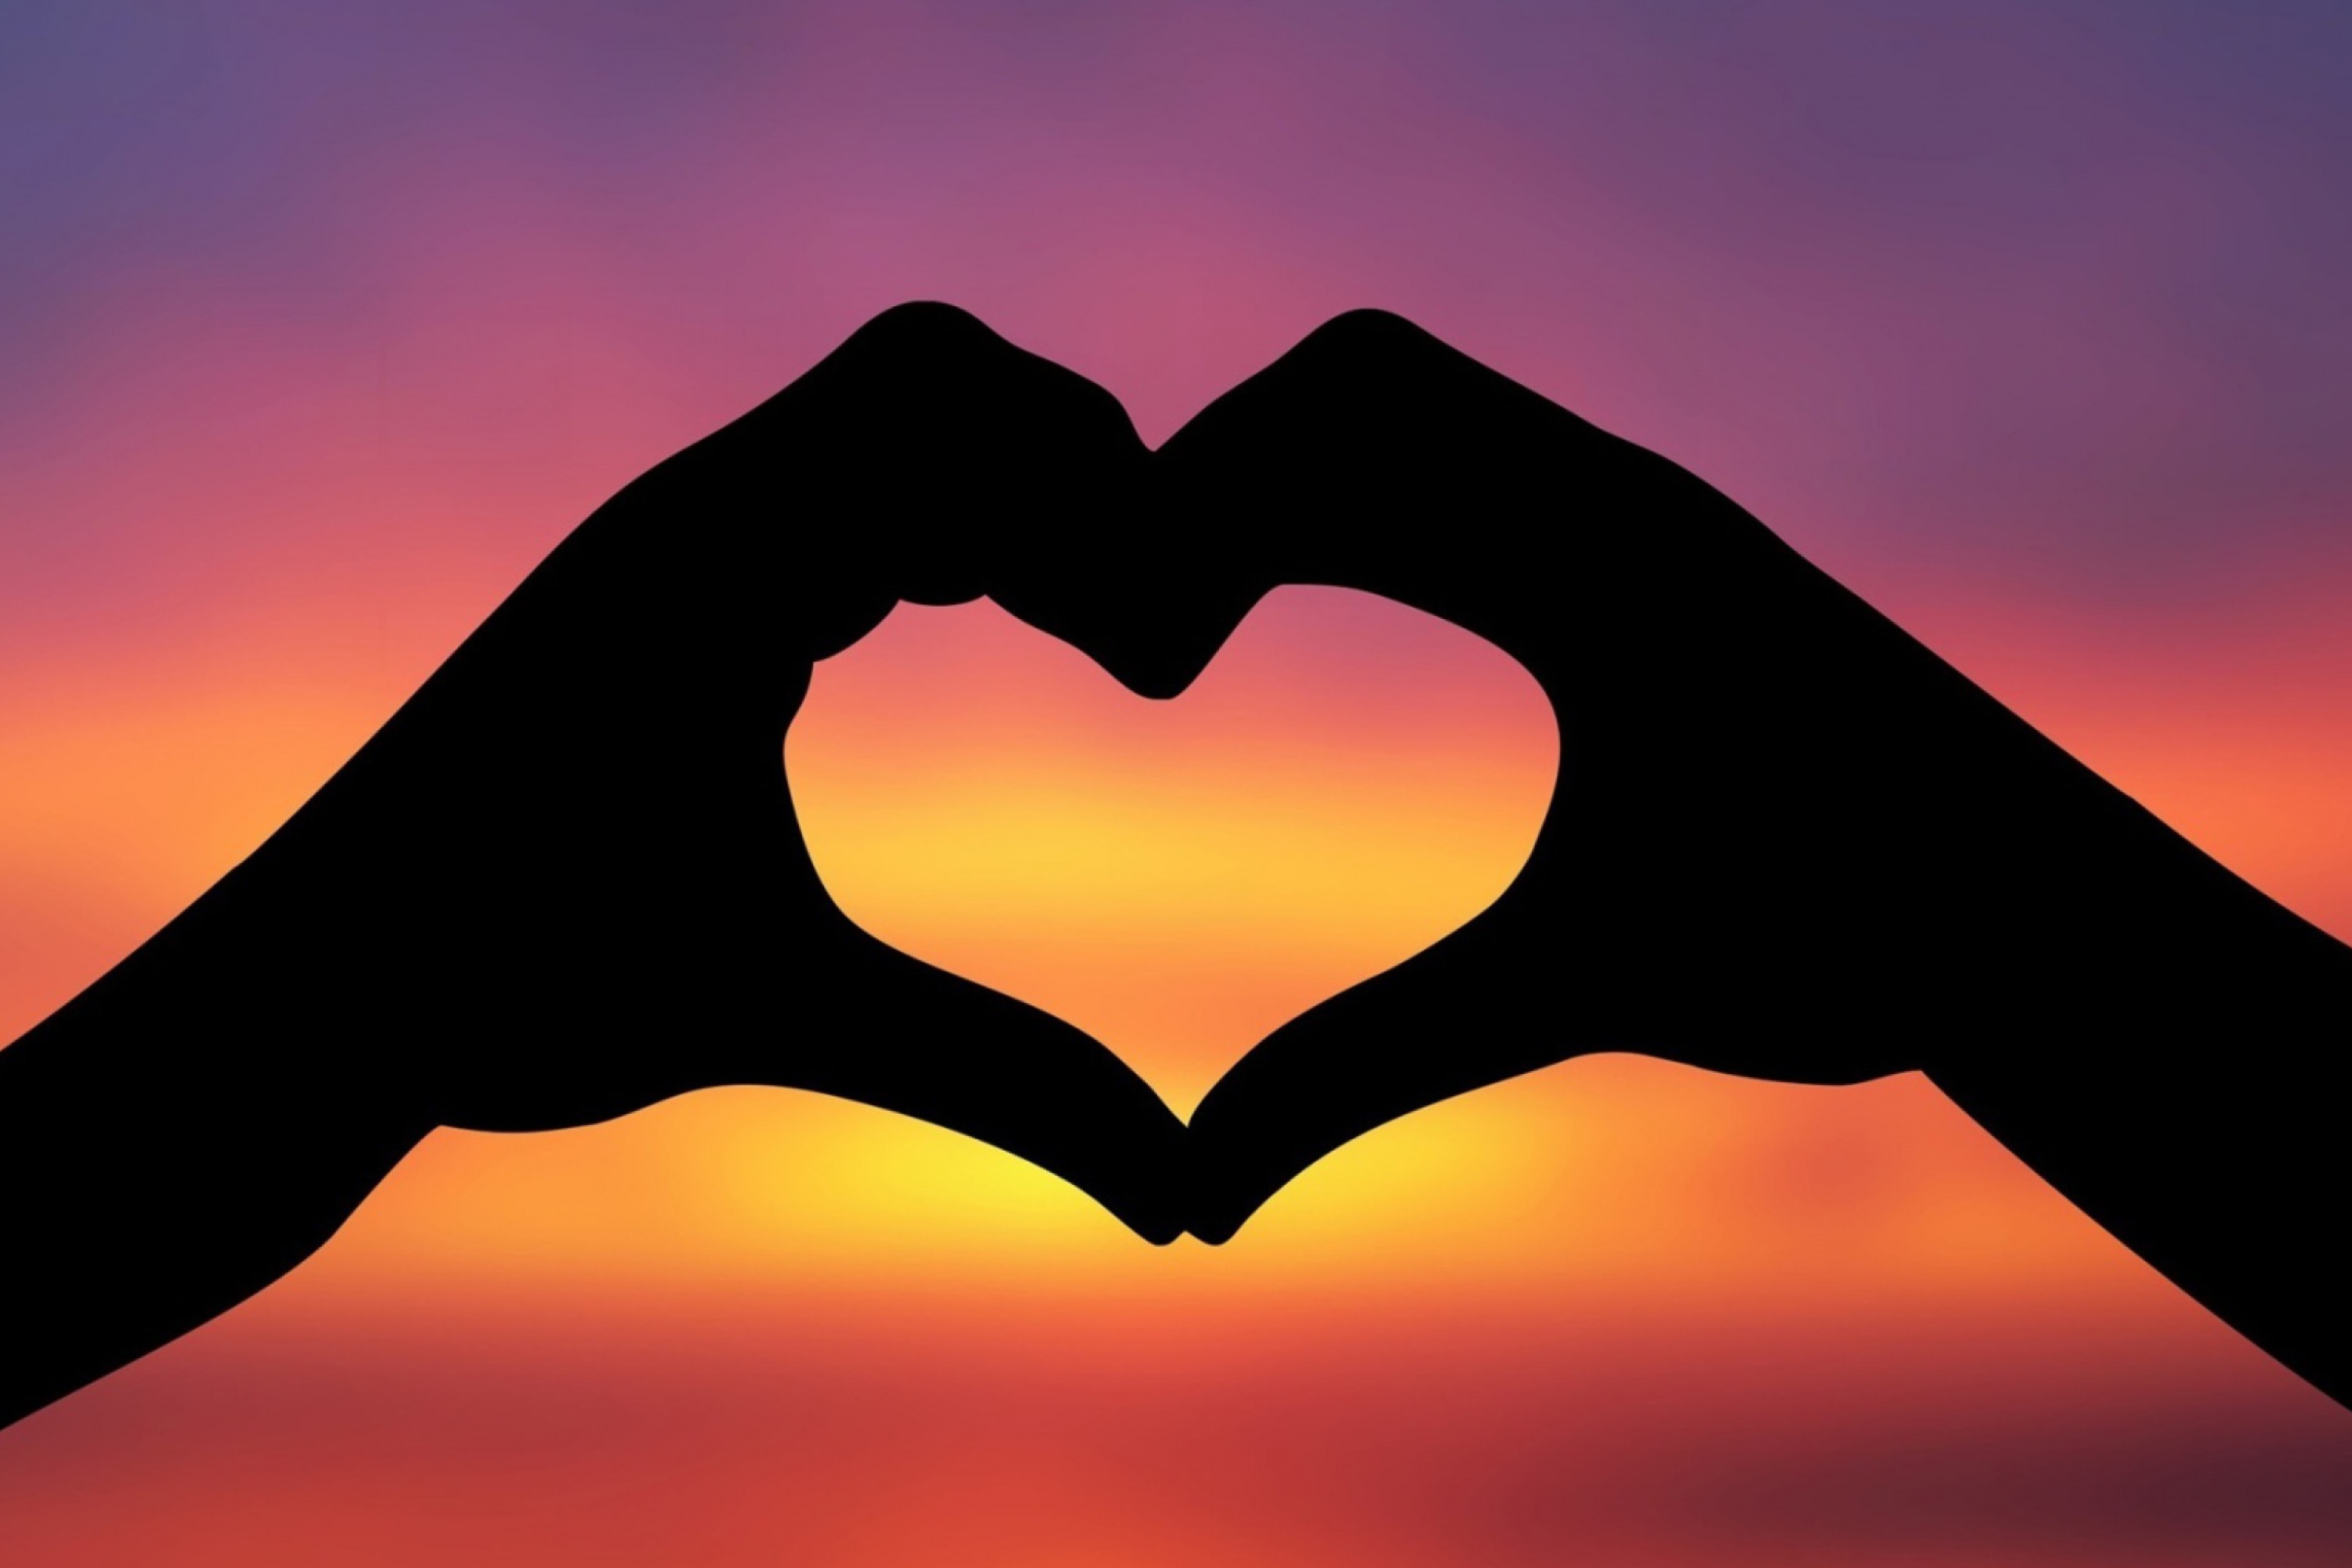 Hands Making A Heart In The Sunset wallpaper 2880x1920